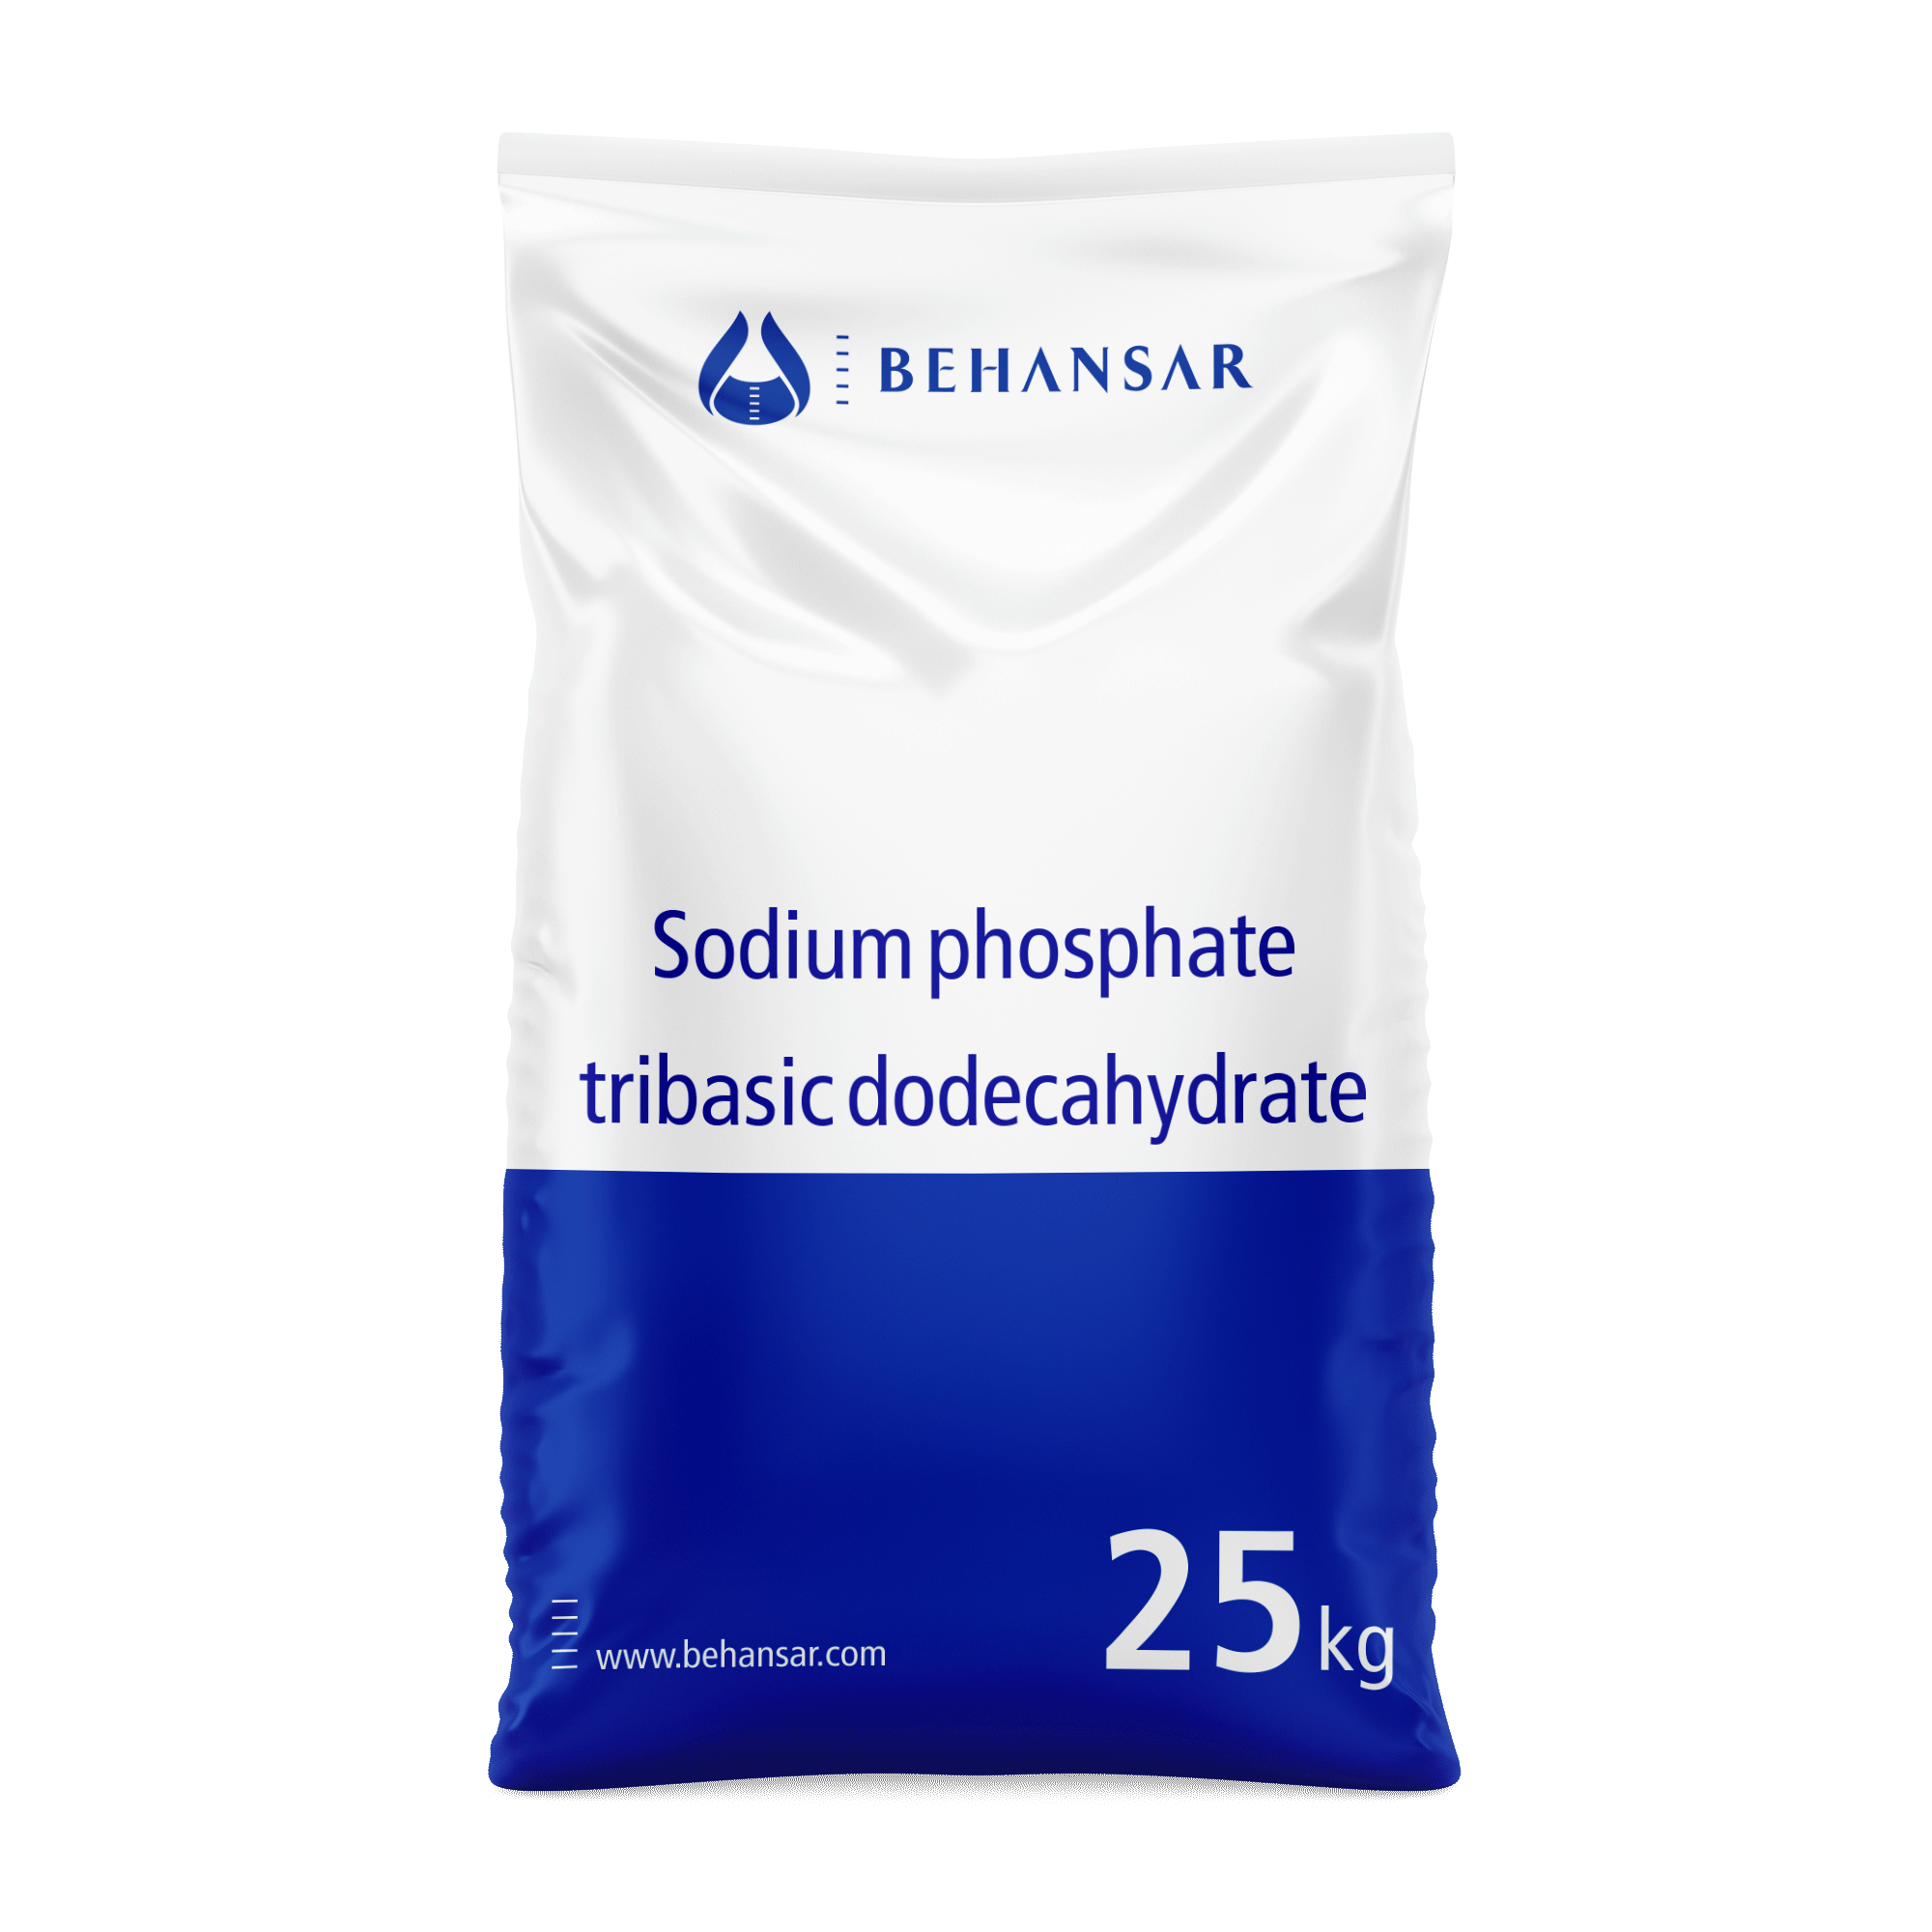 Sodium phosphate tribasic dodecahydrate is one of the products of Behansar Co